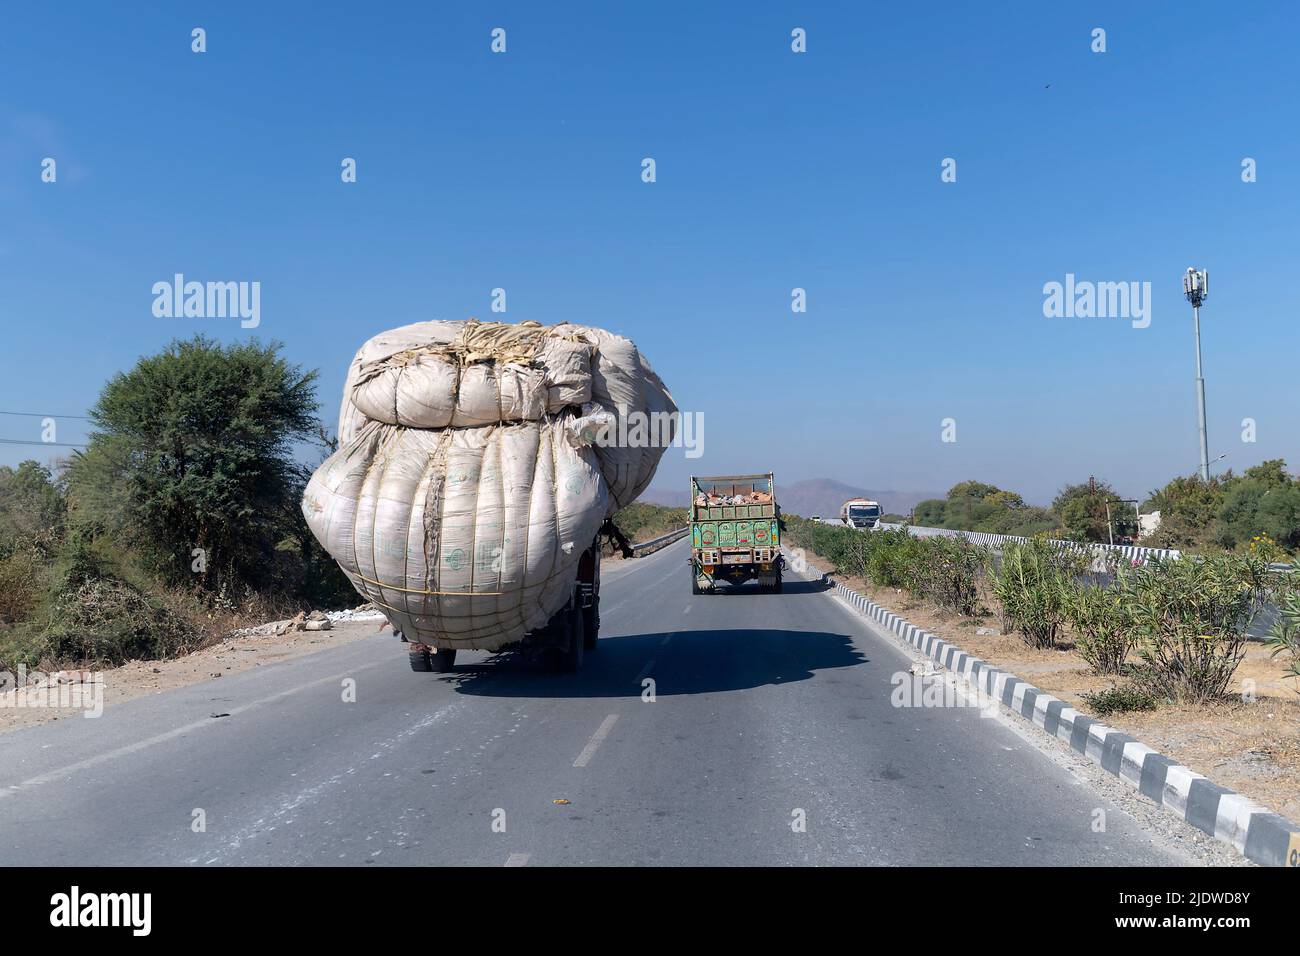 On the road again. Scene from Highway 27, Amberi, Rajasthan, India. Stock Photo